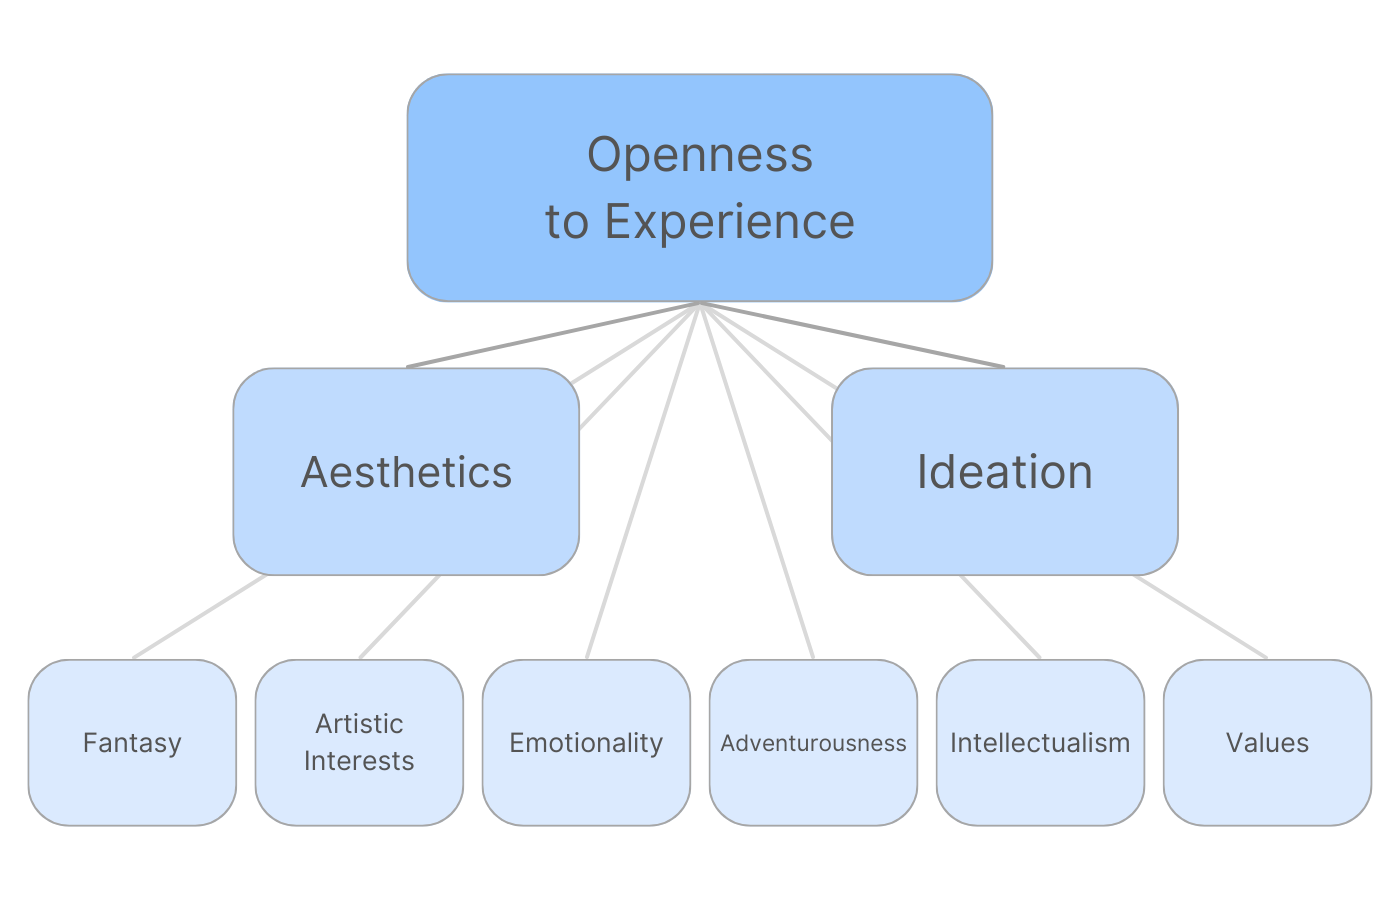 The Openness to Experience dimension and its aspects and facets